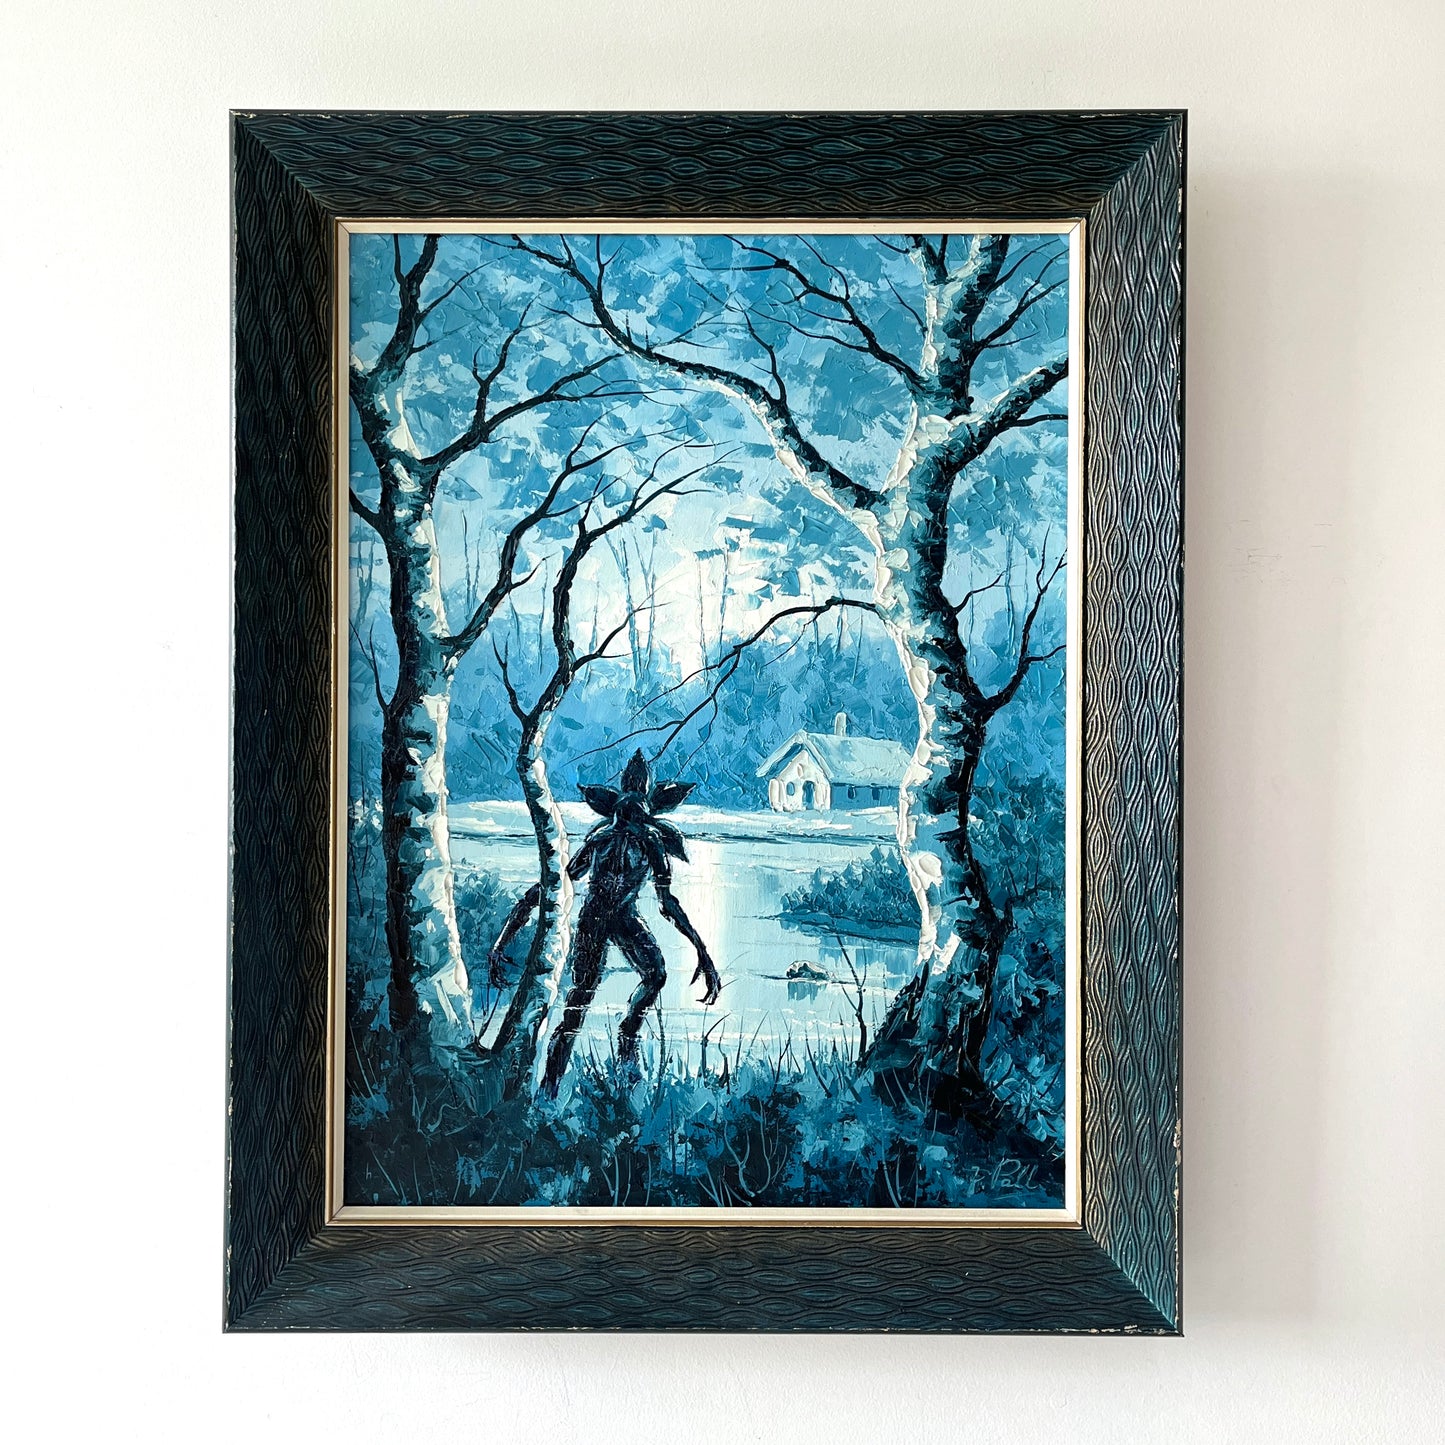 Watcher in the Woods, original upcycled vintage painting